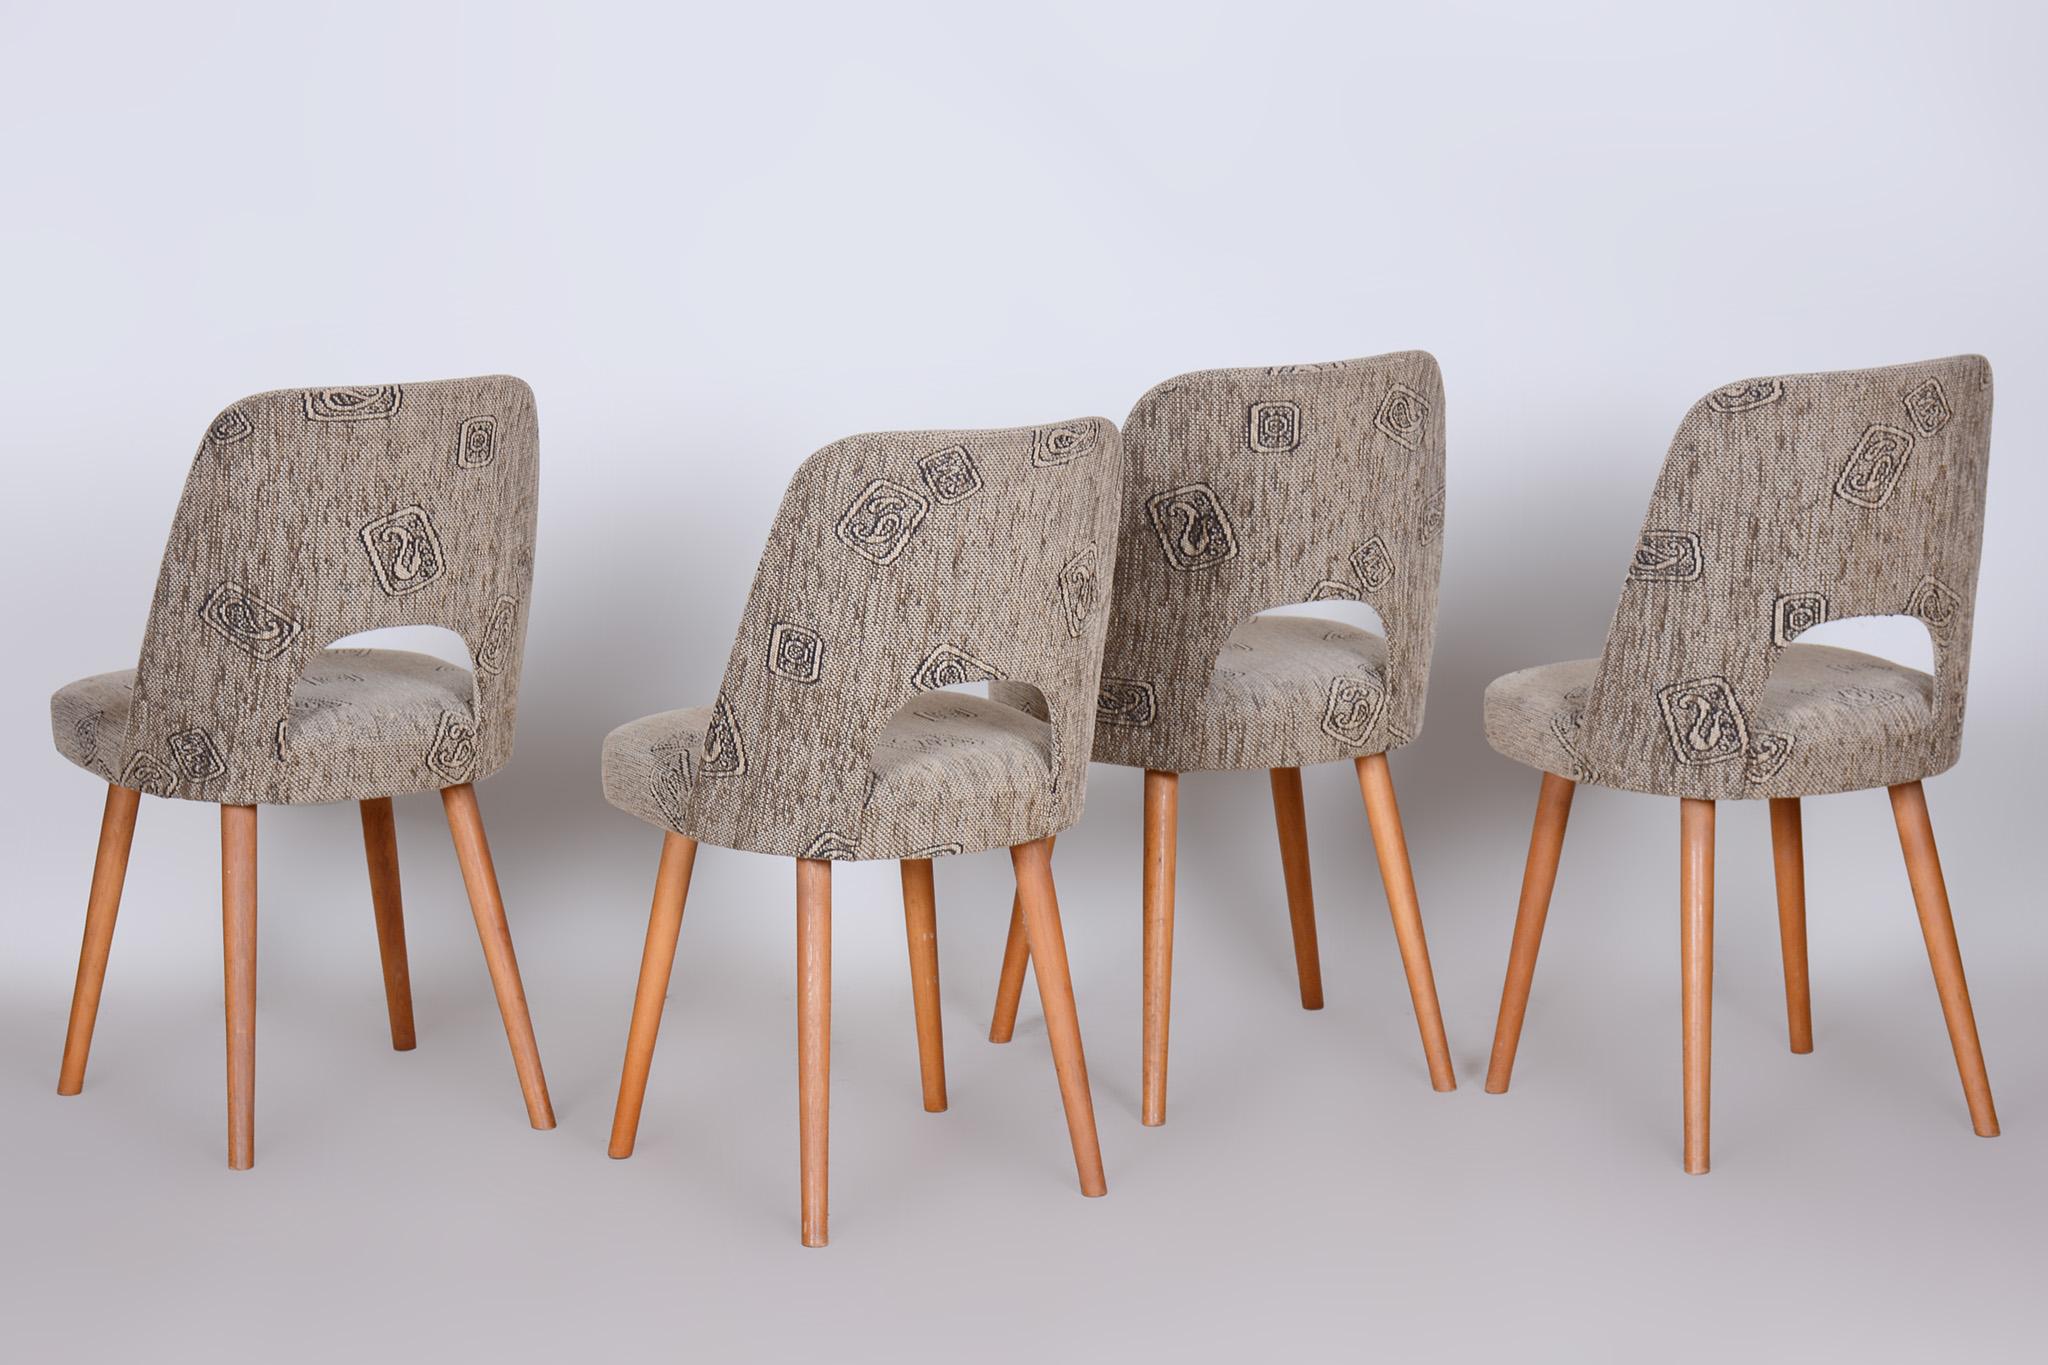 Czech Grey and Brown Ash Chairs by Oswald Haerdtl, 4 Pcs, New Upholstery, 1950s For Sale 2